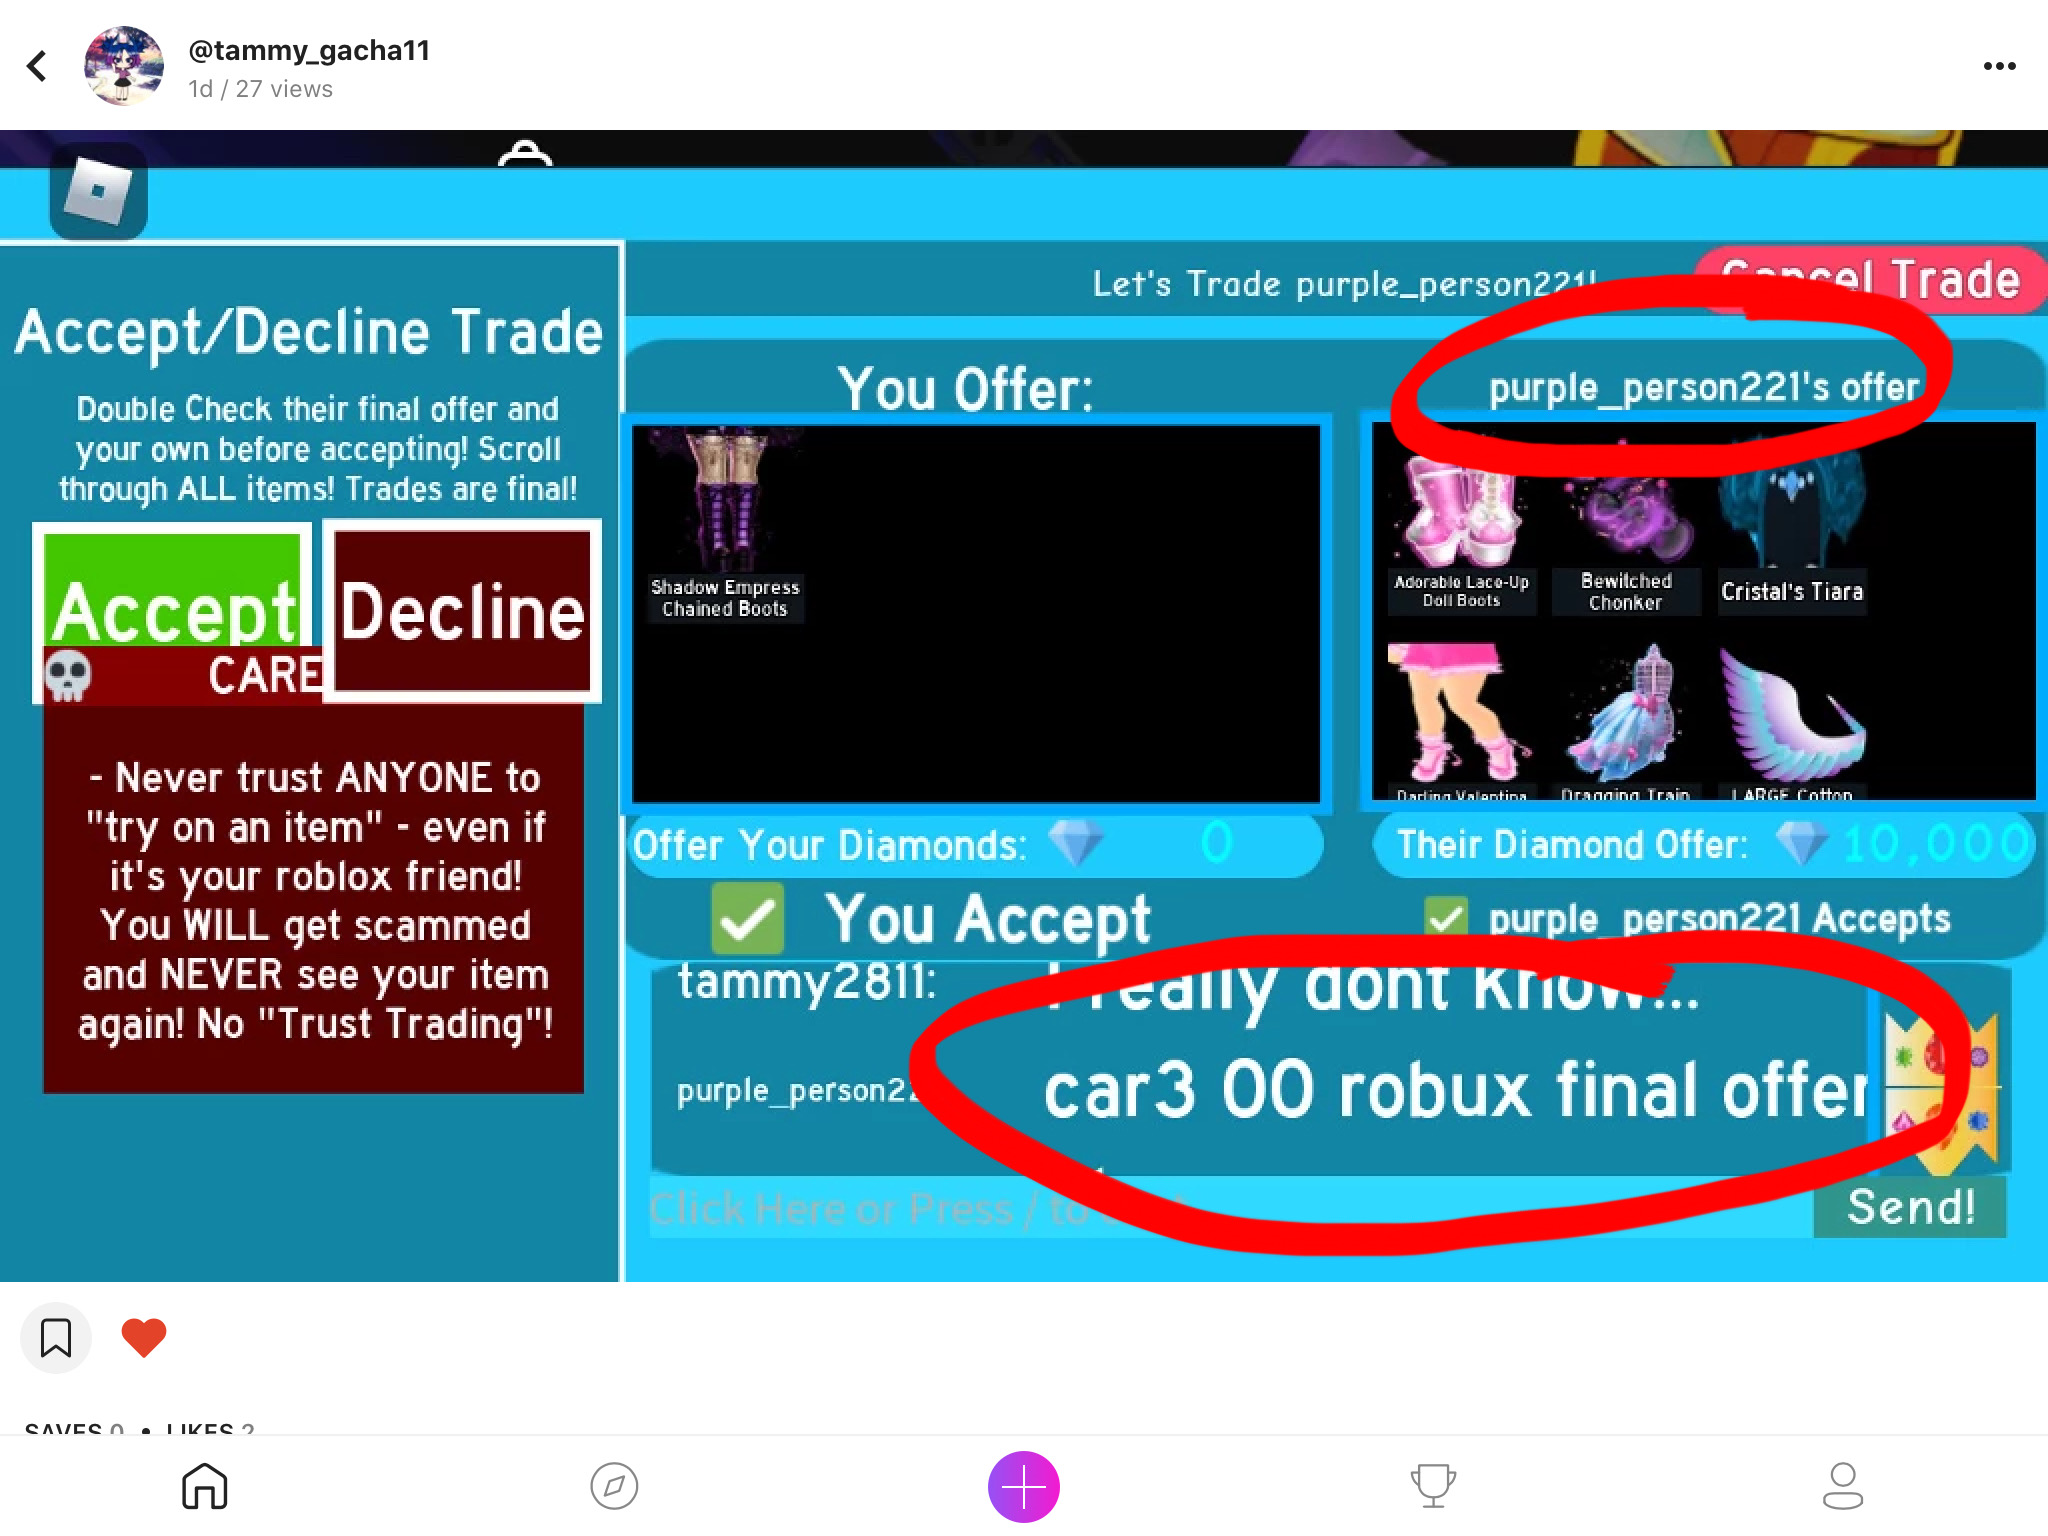 Scammed Roblox Royalehigh My Friend Image By Tammy - how to transfer robux to friend